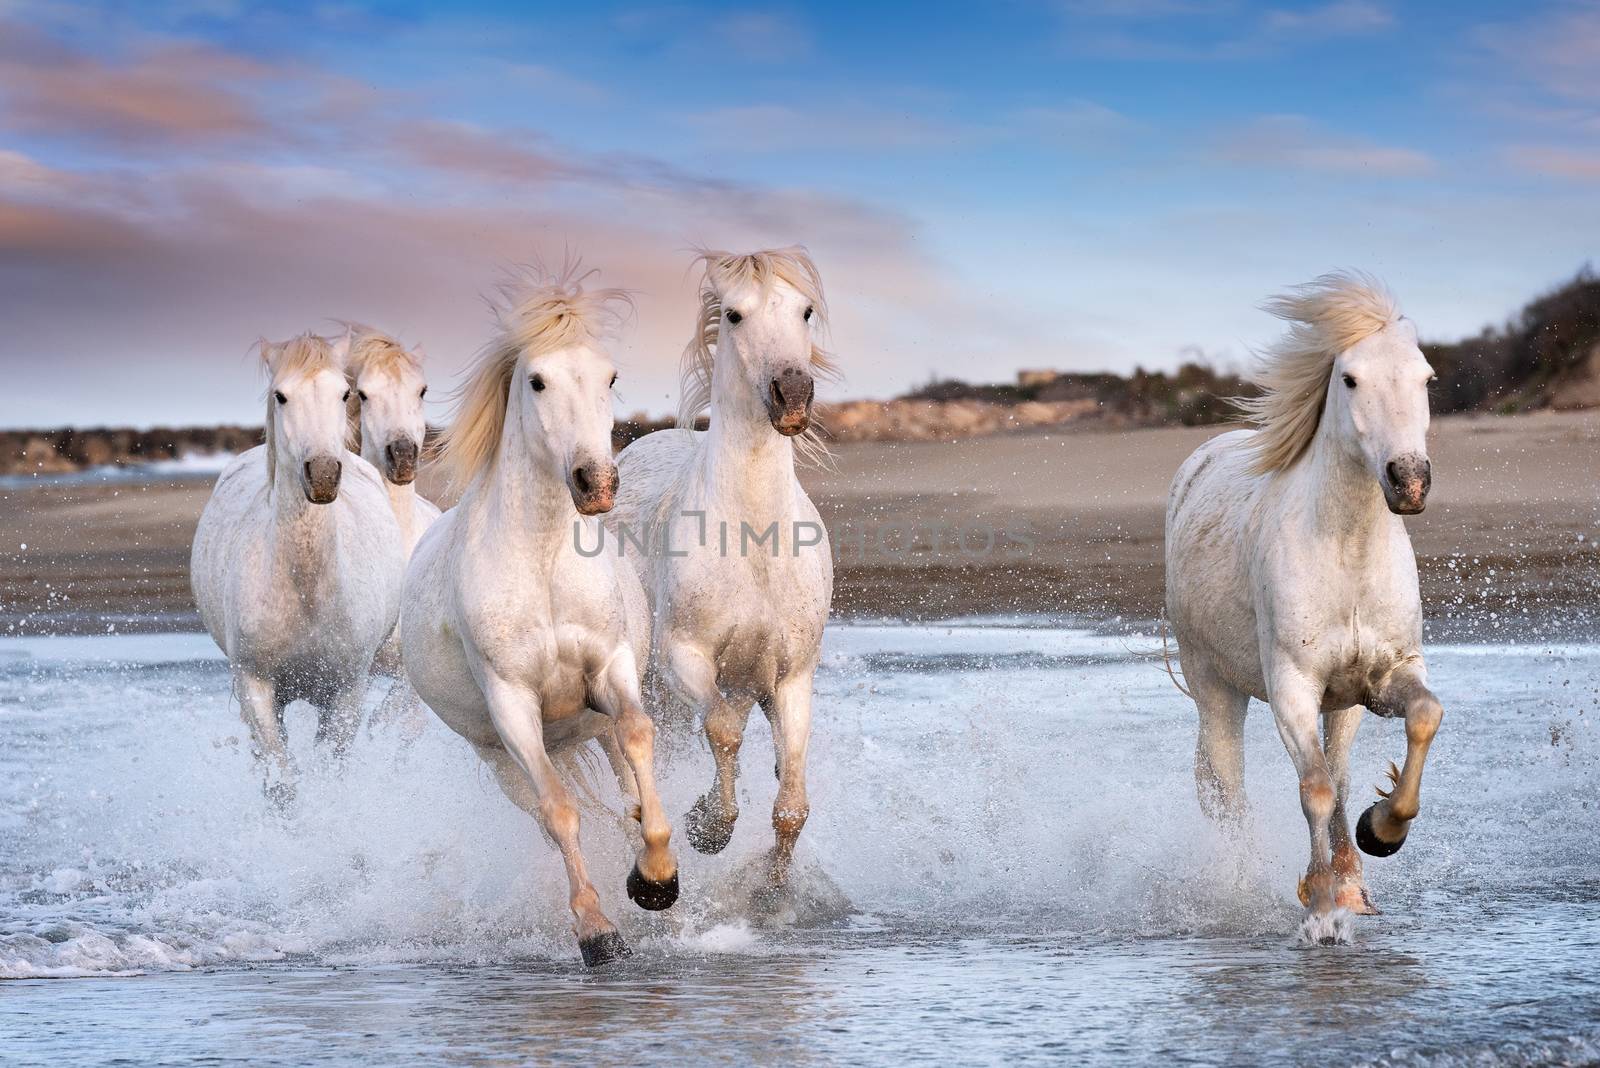 White horses in Camargue, France. by ventdusud